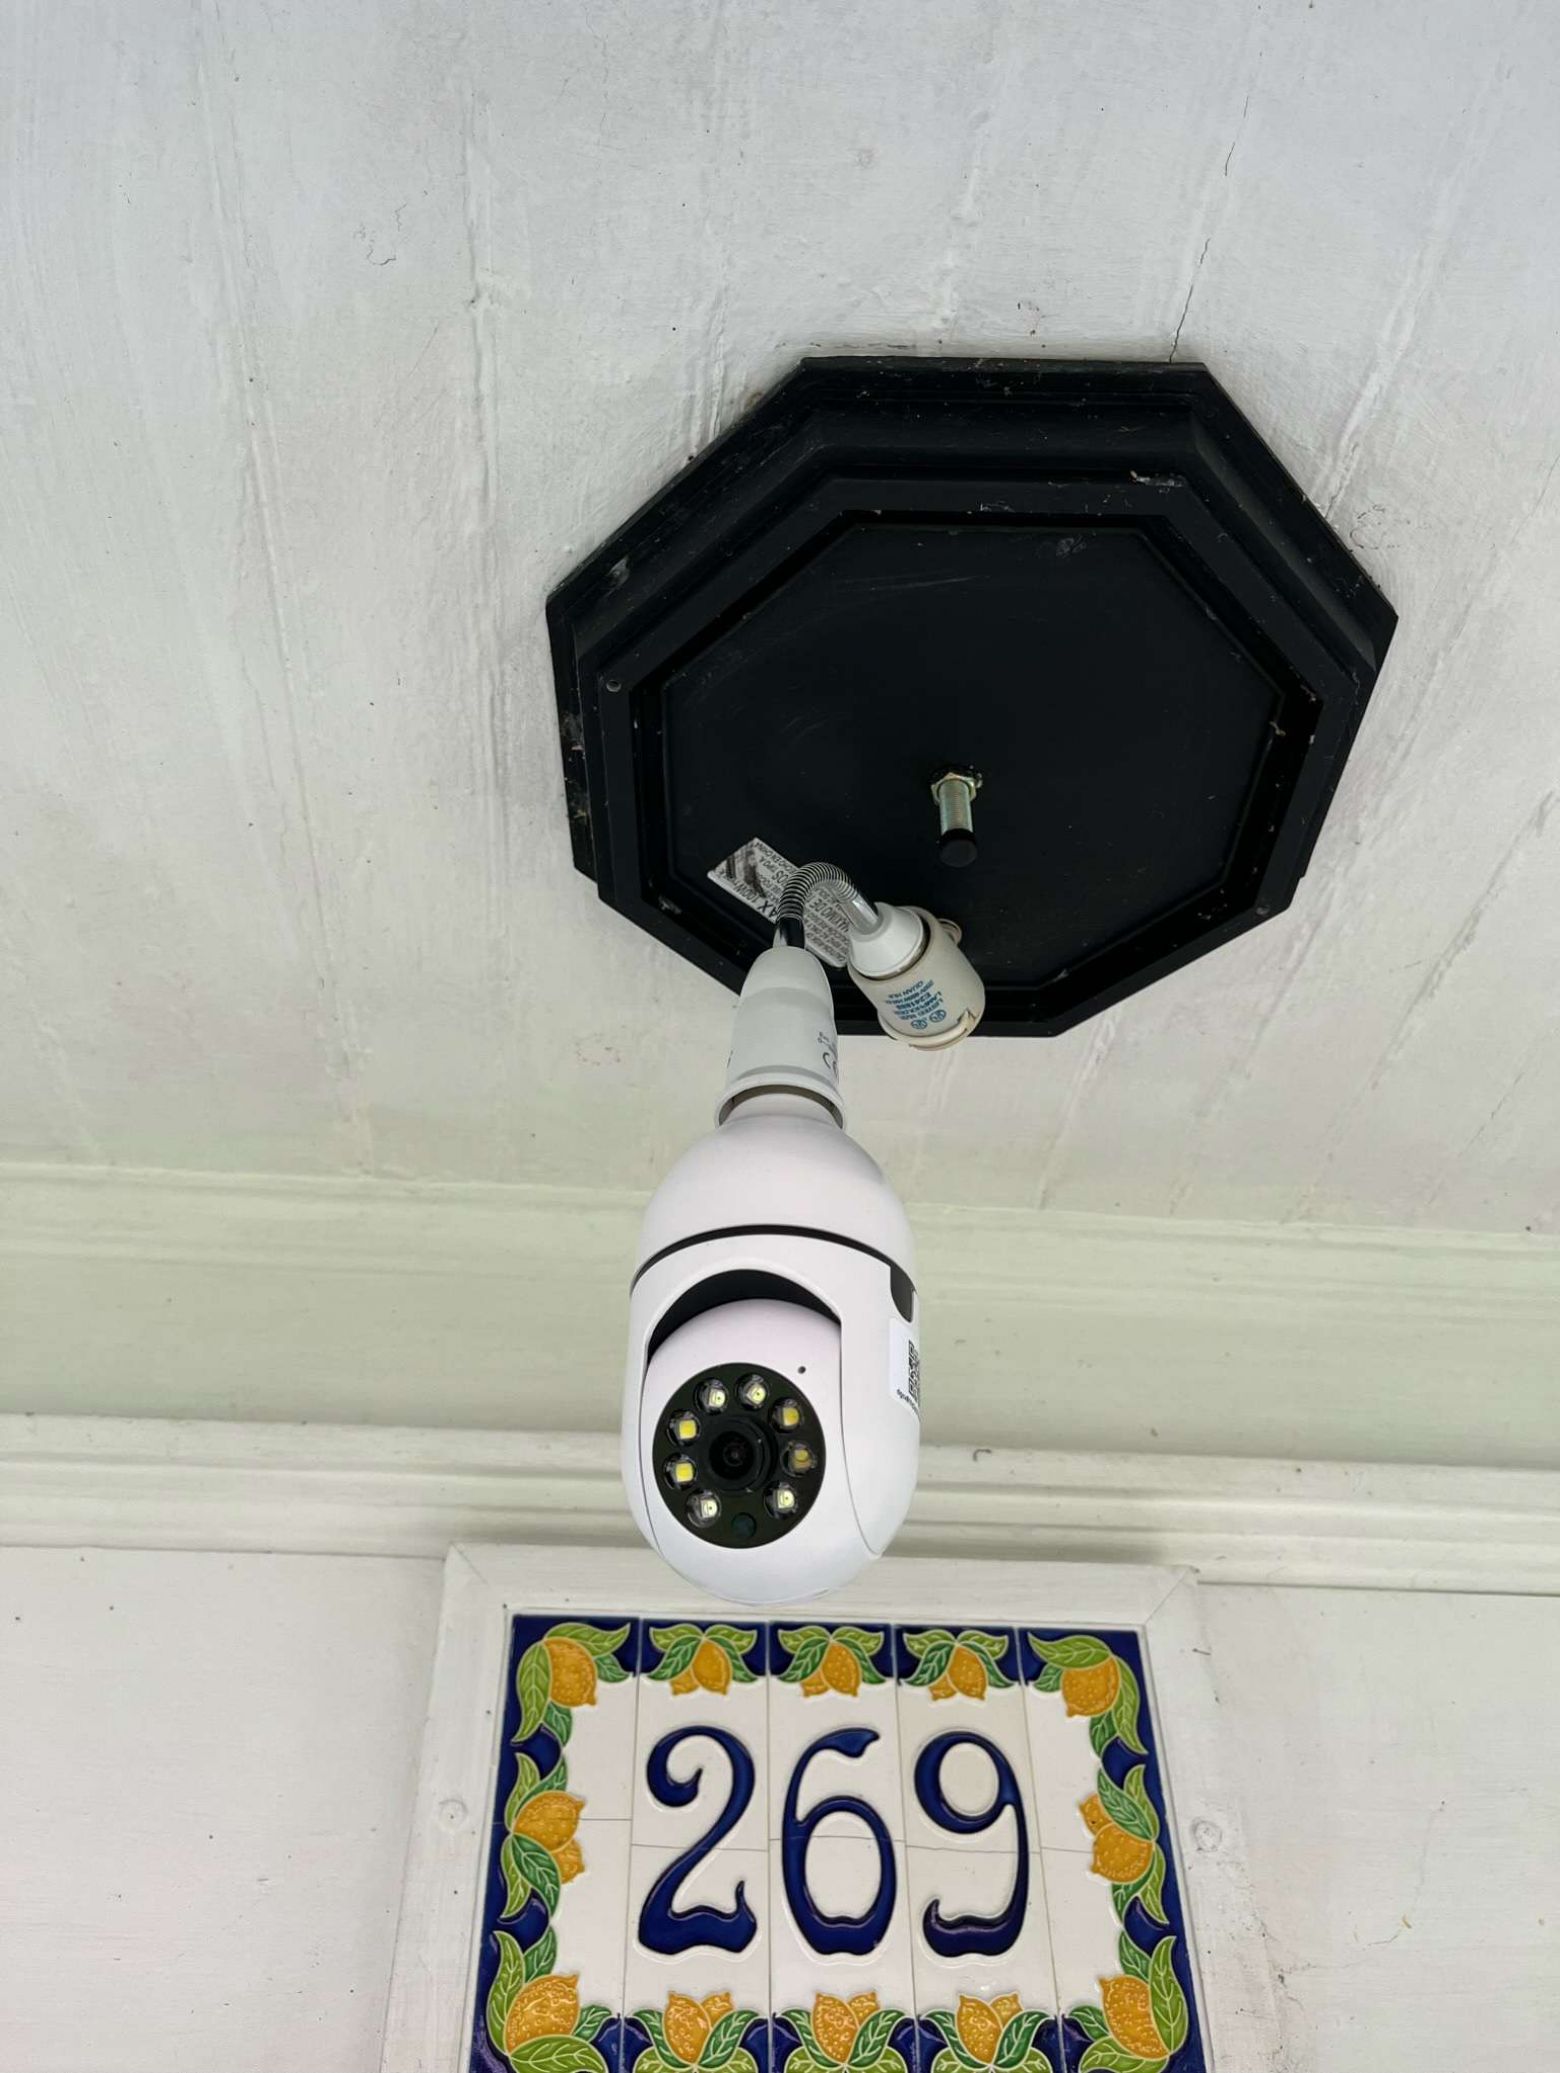 Is The Product Nomad Security Camera A Scam